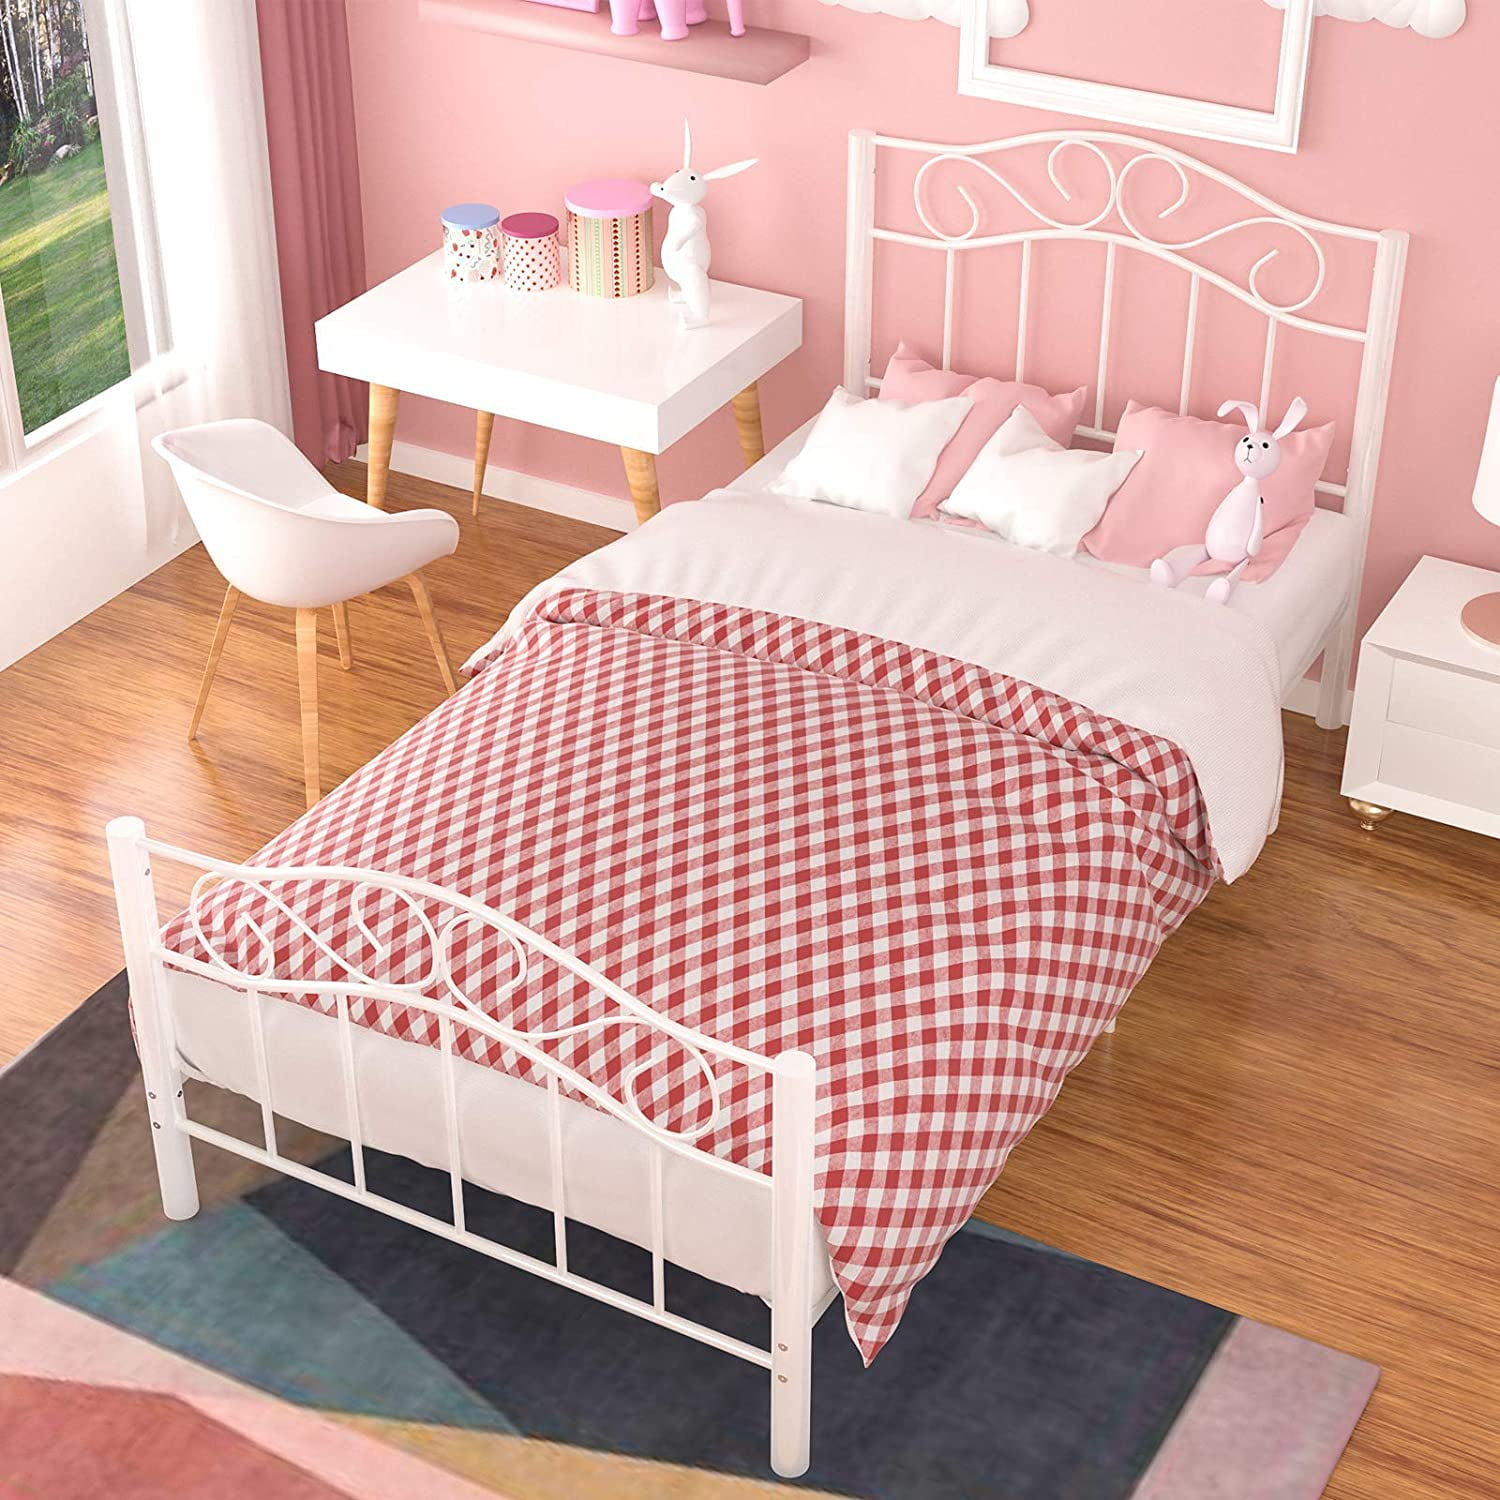 Mecor Twin Xl Curved Metal Bed Frame, Girls Metal Bed Frame